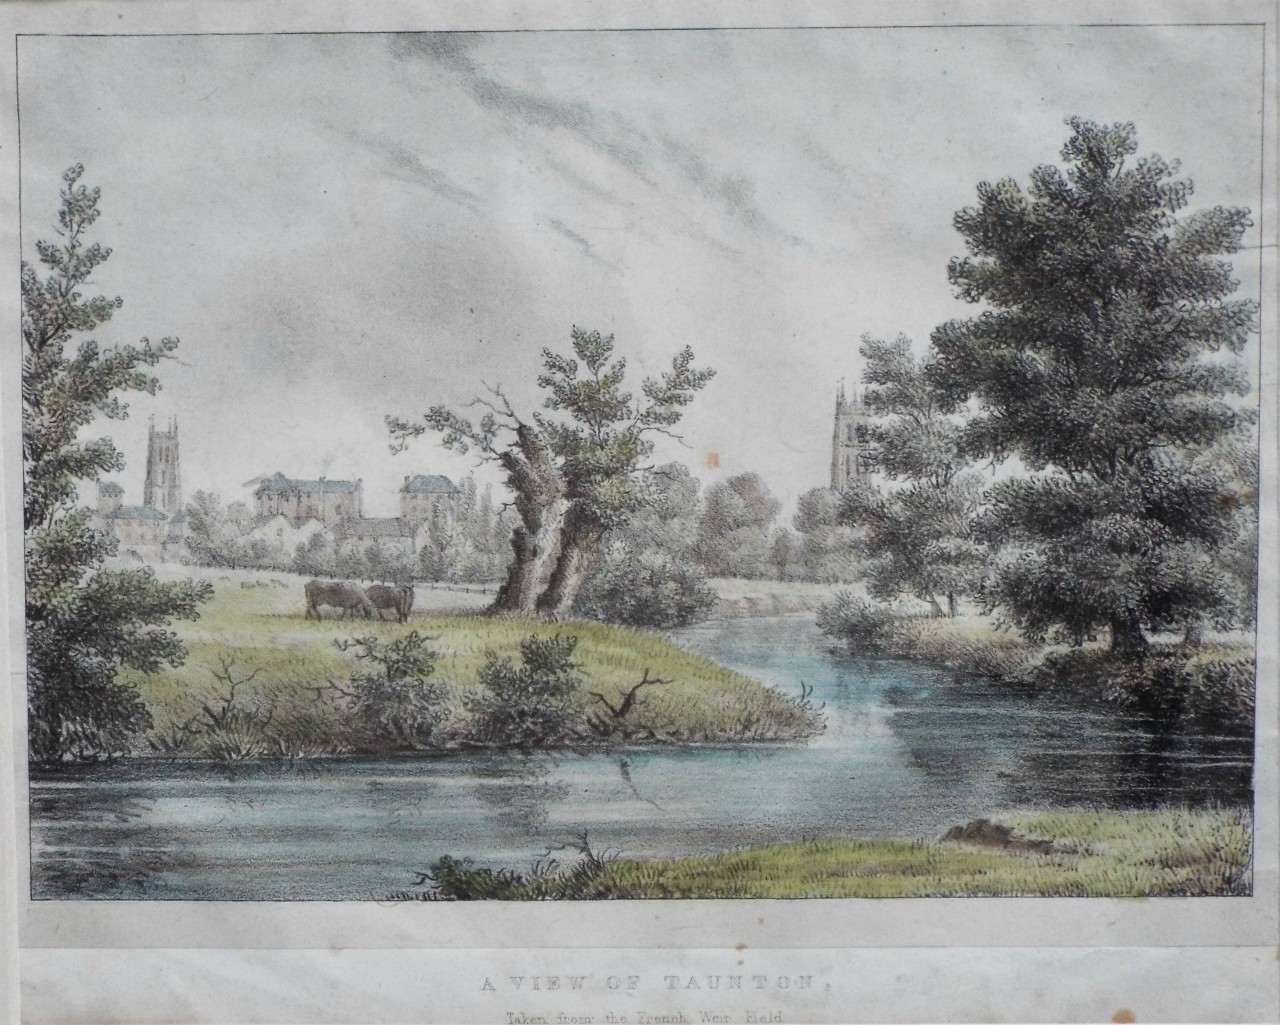 Lithograph - A View of Taunton Taken from the French Weir Field